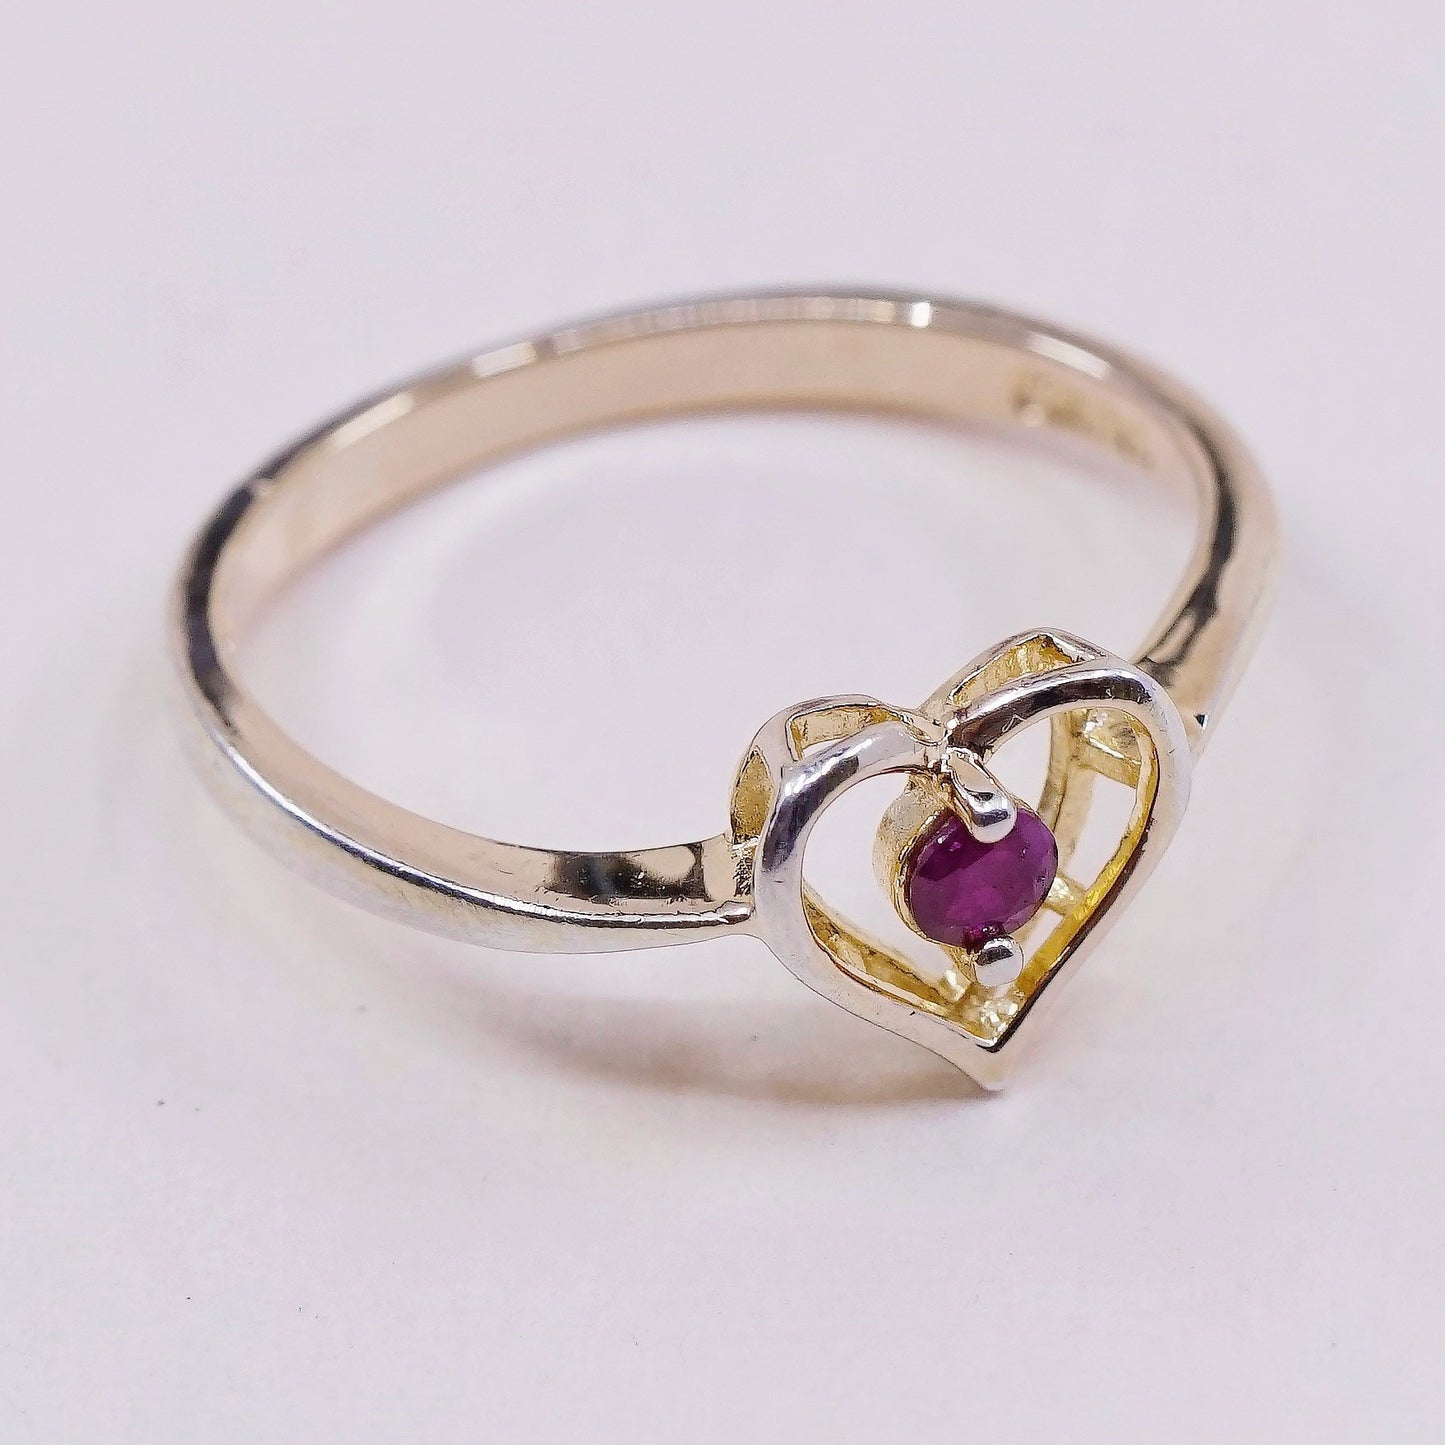 sz 8.25, VTG gold over sterling silver handmade ring, 925 heart with ruby